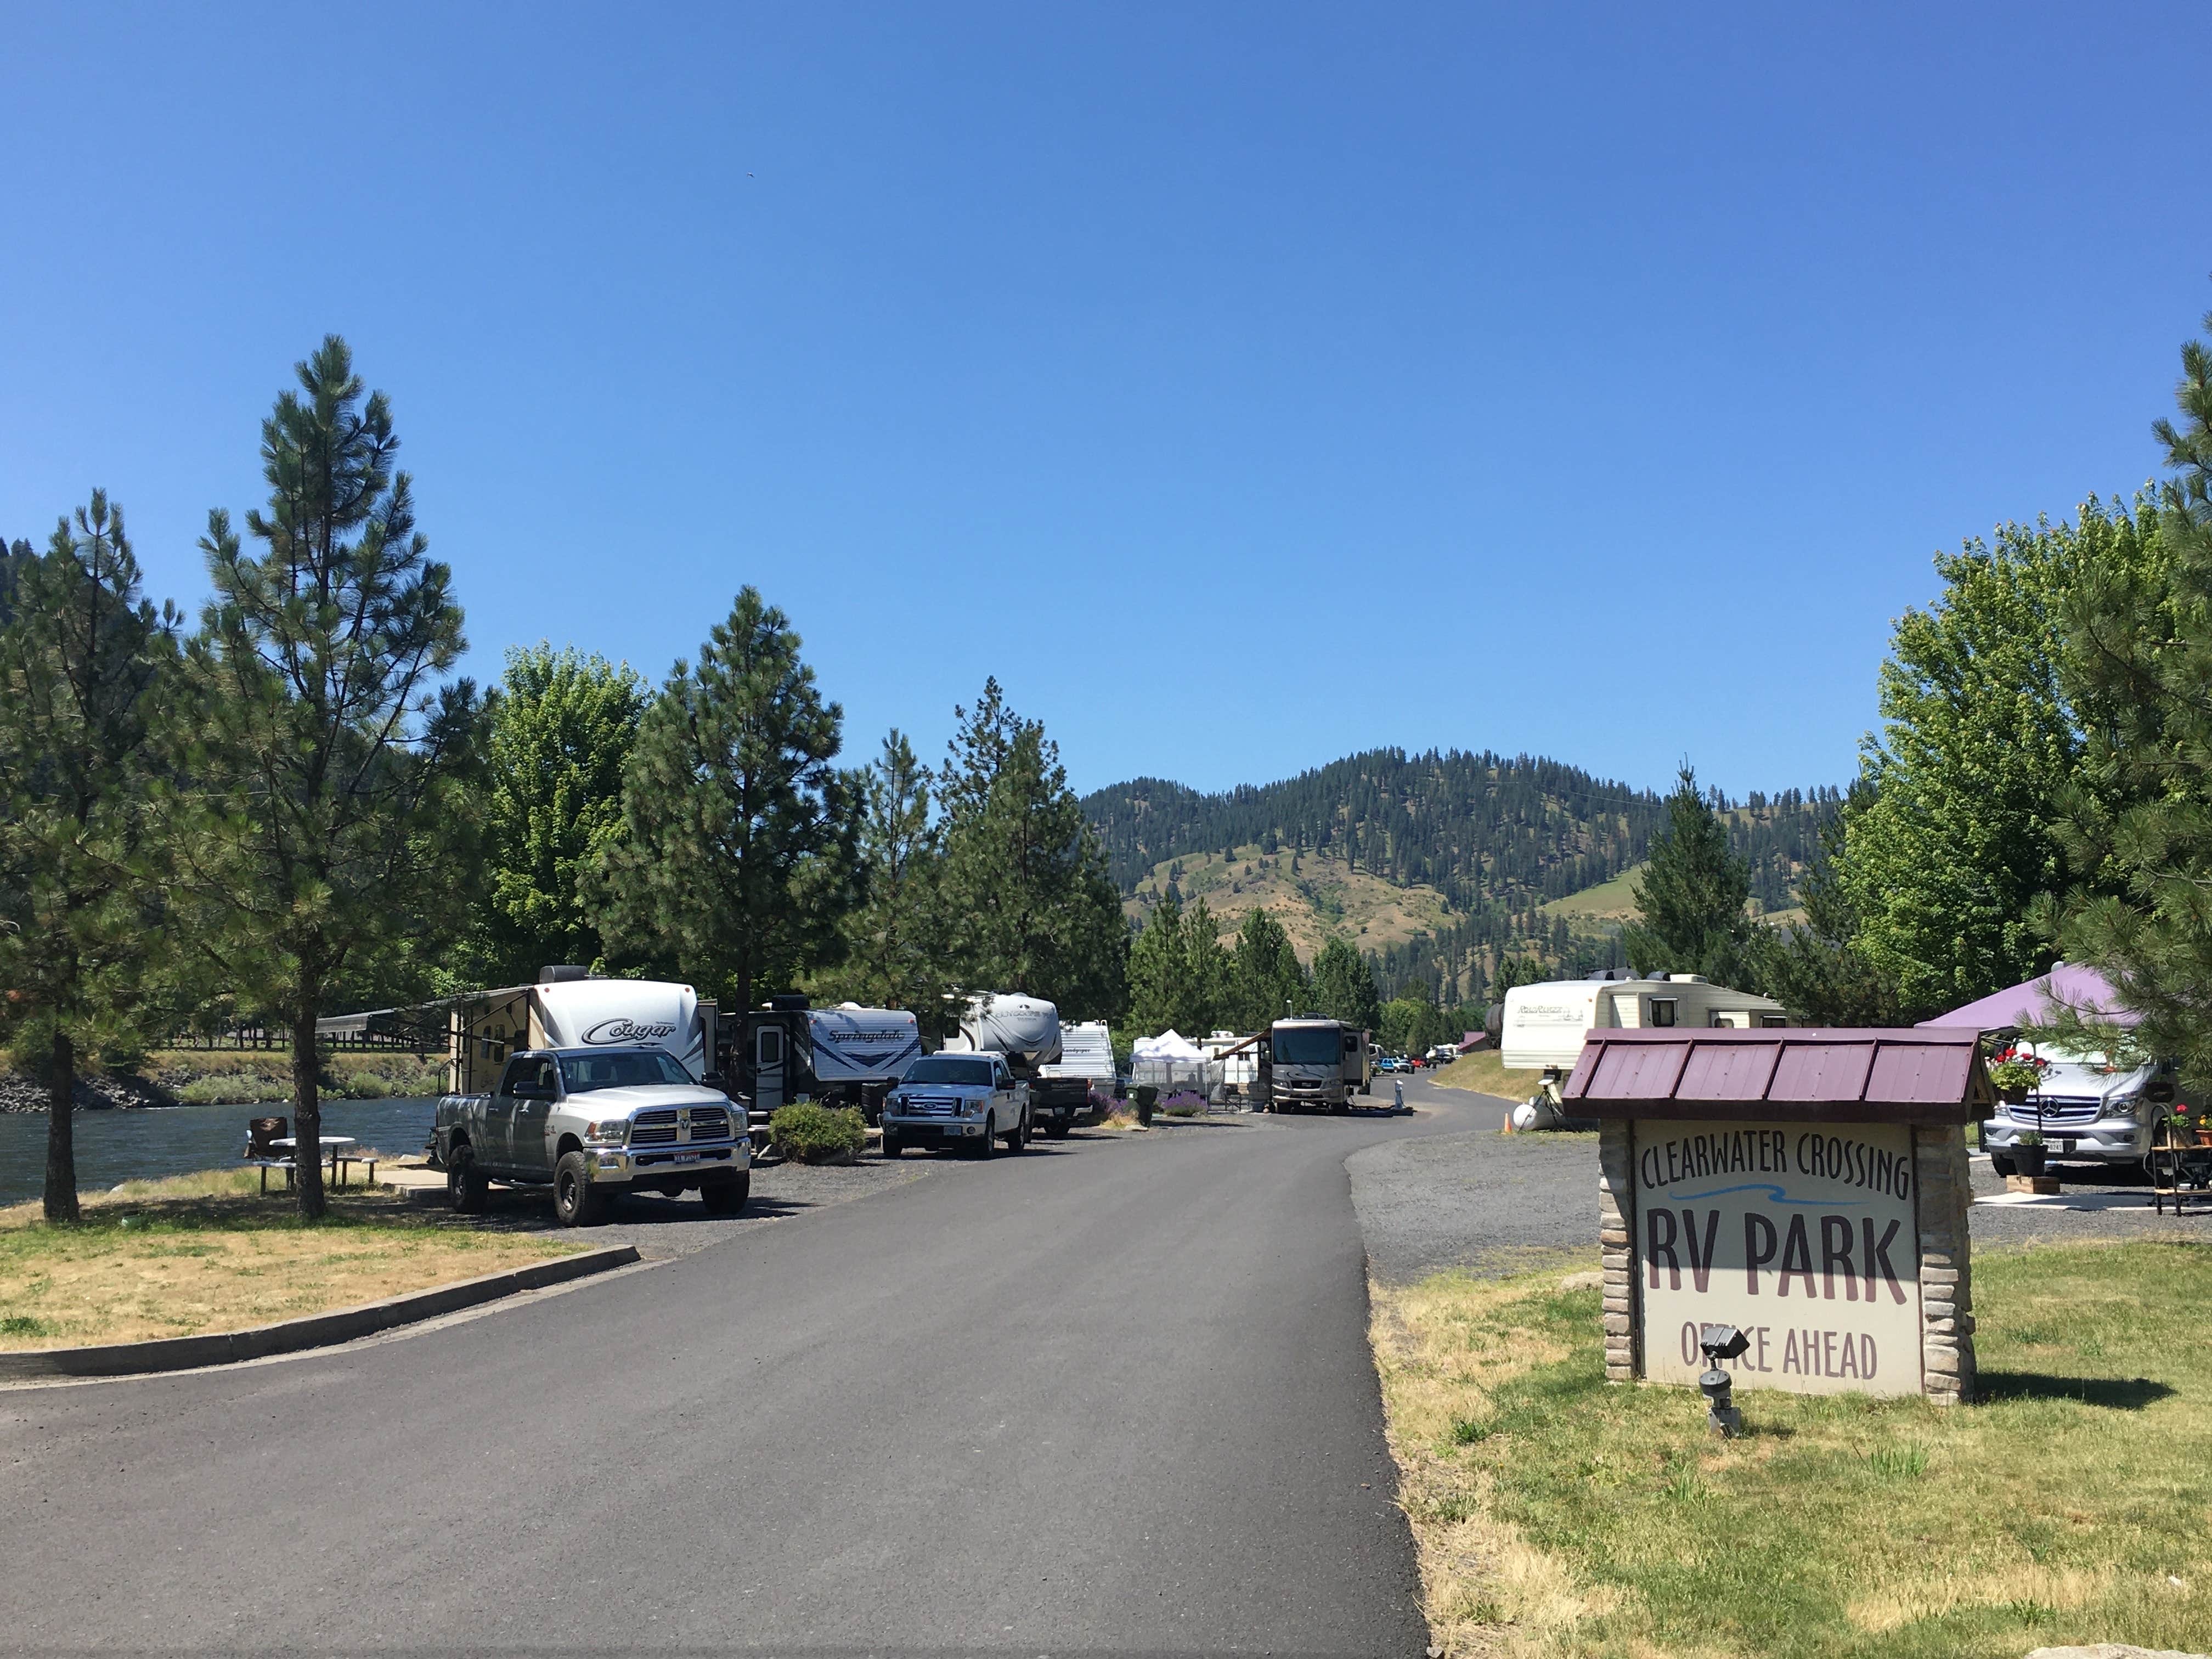 Camper submitted image from Clearwater Crossing RV Park - 2